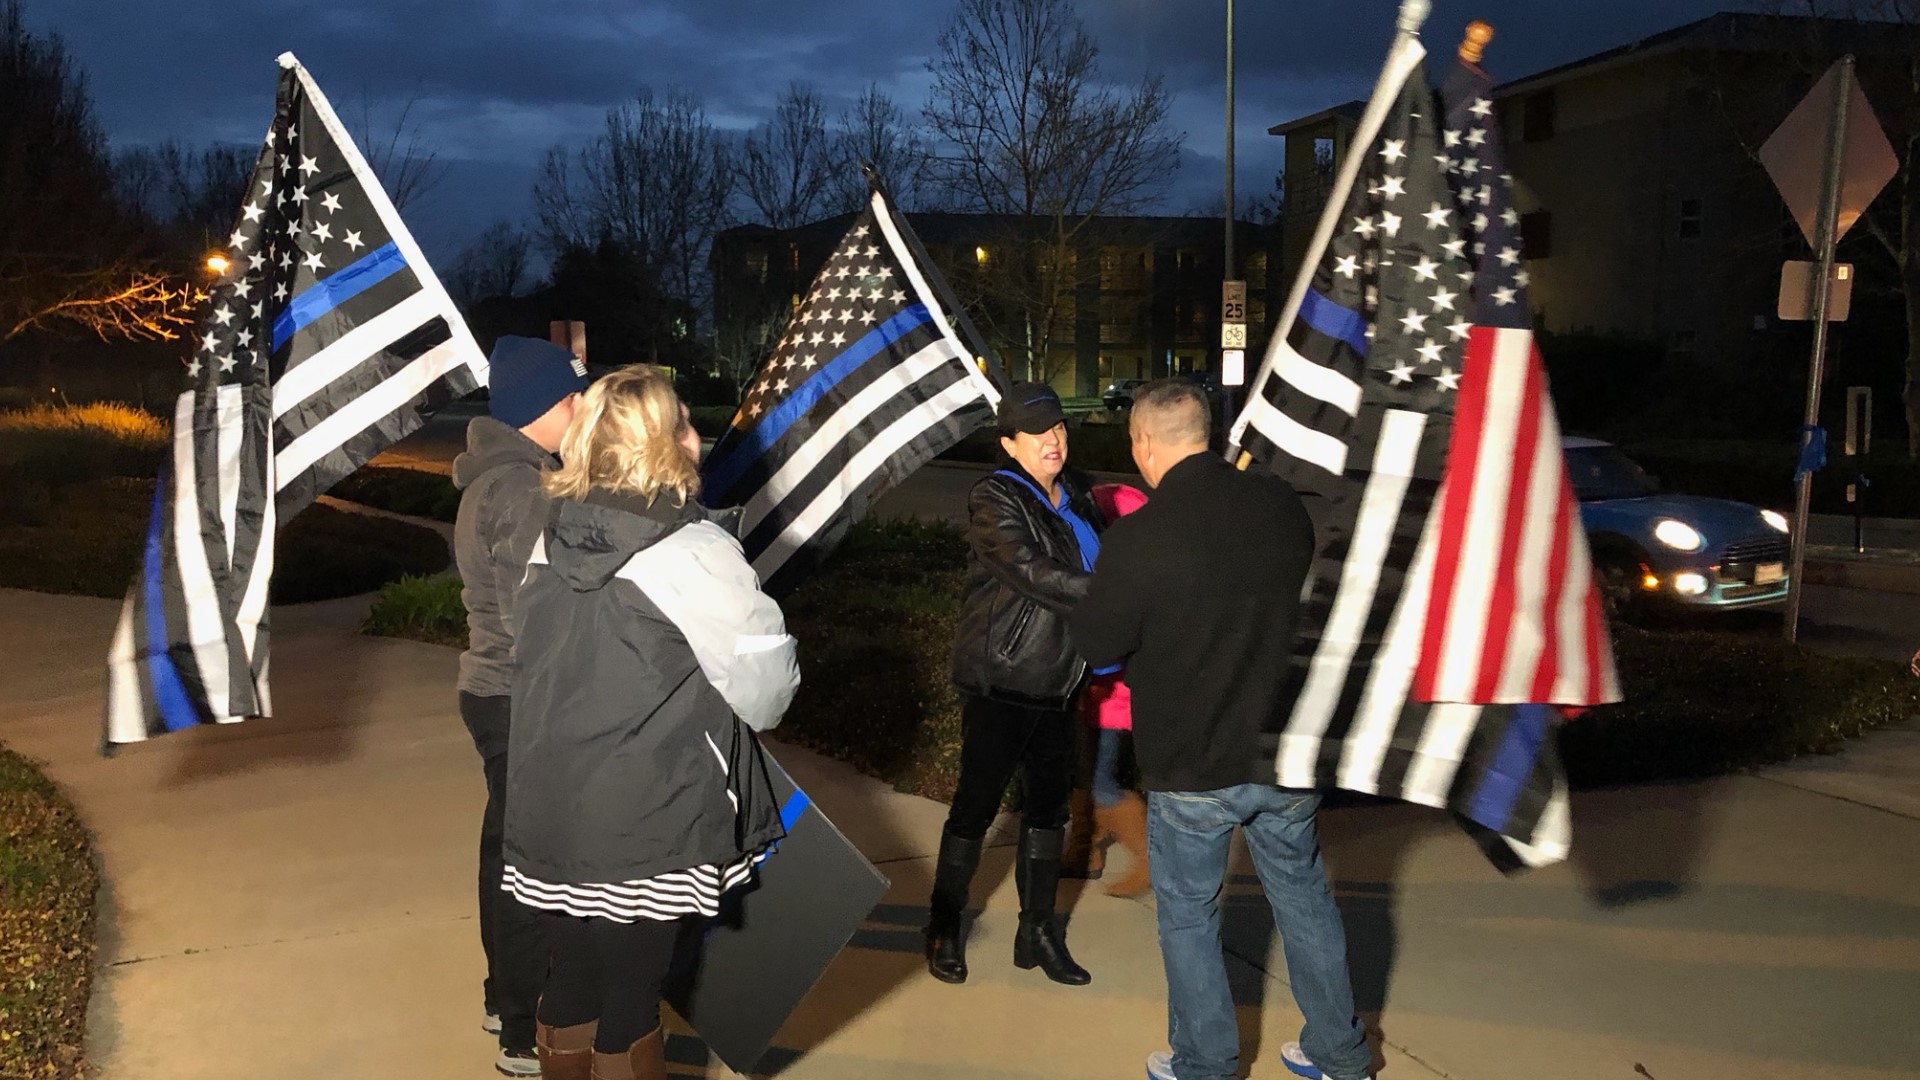 On Thursday night, on the eve of Officer Natalie Corona's funeral, a small group gathered to show their support for law enforcement. They gathered on the corner of Cantrill Drive, named after the first Davis Police Officer to be killed in the line of duty in 1959, Douglas Cantrill.